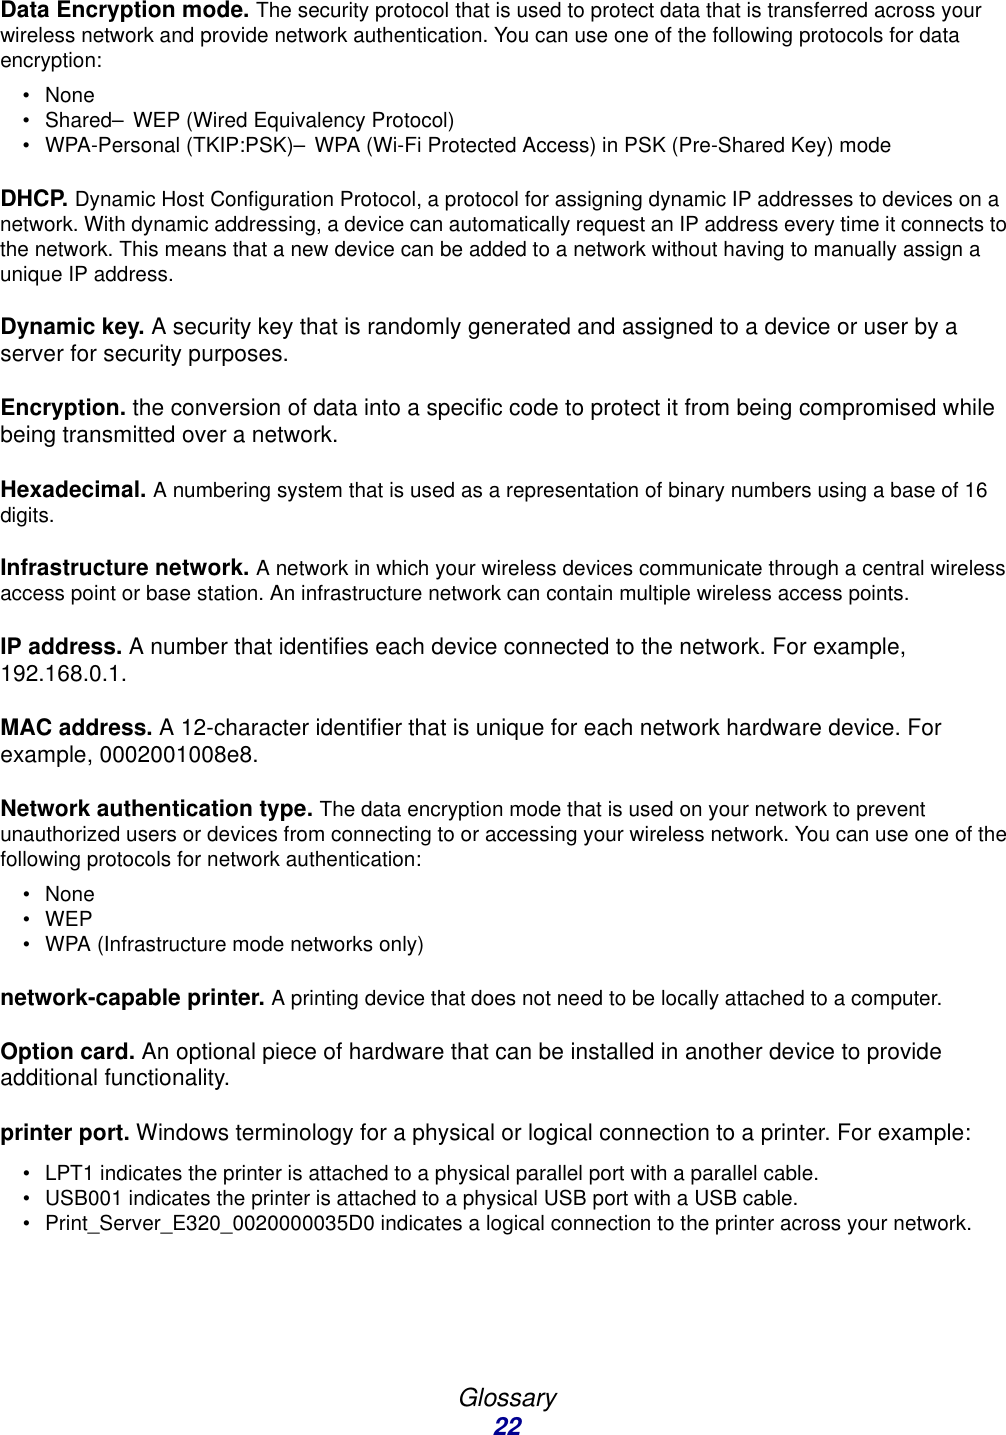 Glossary22Data Encryption mode. The security protocol that is used to protect data that is transferred across your wireless network and provide network authentication. You can use one of the following protocols for data encryption:•None• Shared–WEP (Wired Equivalency Protocol)• WPA-Personal (TKIP:PSK)–WPA (Wi-Fi Protected Access) in PSK (Pre-Shared Key) modeDHCP. Dynamic Host Configuration Protocol, a protocol for assigning dynamic IP addresses to devices on a network. With dynamic addressing, a device can automatically request an IP address every time it connects to the network. This means that a new device can be added to a network without having to manually assign a unique IP address. Dynamic key. A security key that is randomly generated and assigned to a device or user by a server for security purposes. Encryption. the conversion of data into a specific code to protect it from being compromised while being transmitted over a network. Hexadecimal. A numbering system that is used as a representation of binary numbers using a base of 16 digits. Infrastructure network. A network in which your wireless devices communicate through a central wireless access point or base station. An infrastructure network can contain multiple wireless access points.IP address. A number that identifies each device connected to the network. For example, 192.168.0.1.MAC address. A 12-character identifier that is unique for each network hardware device. For example, 0002001008e8.Network authentication type. The data encryption mode that is used on your network to prevent unauthorized users or devices from connecting to or accessing your wireless network. You can use one of the following protocols for network authentication:•None•WEP• WPA (Infrastructure mode networks only)network-capable printer. A printing device that does not need to be locally attached to a computer. Option card. An optional piece of hardware that can be installed in another device to provide additional functionality. printer port. Windows terminology for a physical or logical connection to a printer. For example: • LPT1 indicates the printer is attached to a physical parallel port with a parallel cable.• USB001 indicates the printer is attached to a physical USB port with a USB cable.• Print_Server_E320_0020000035D0 indicates a logical connection to the printer across your network.